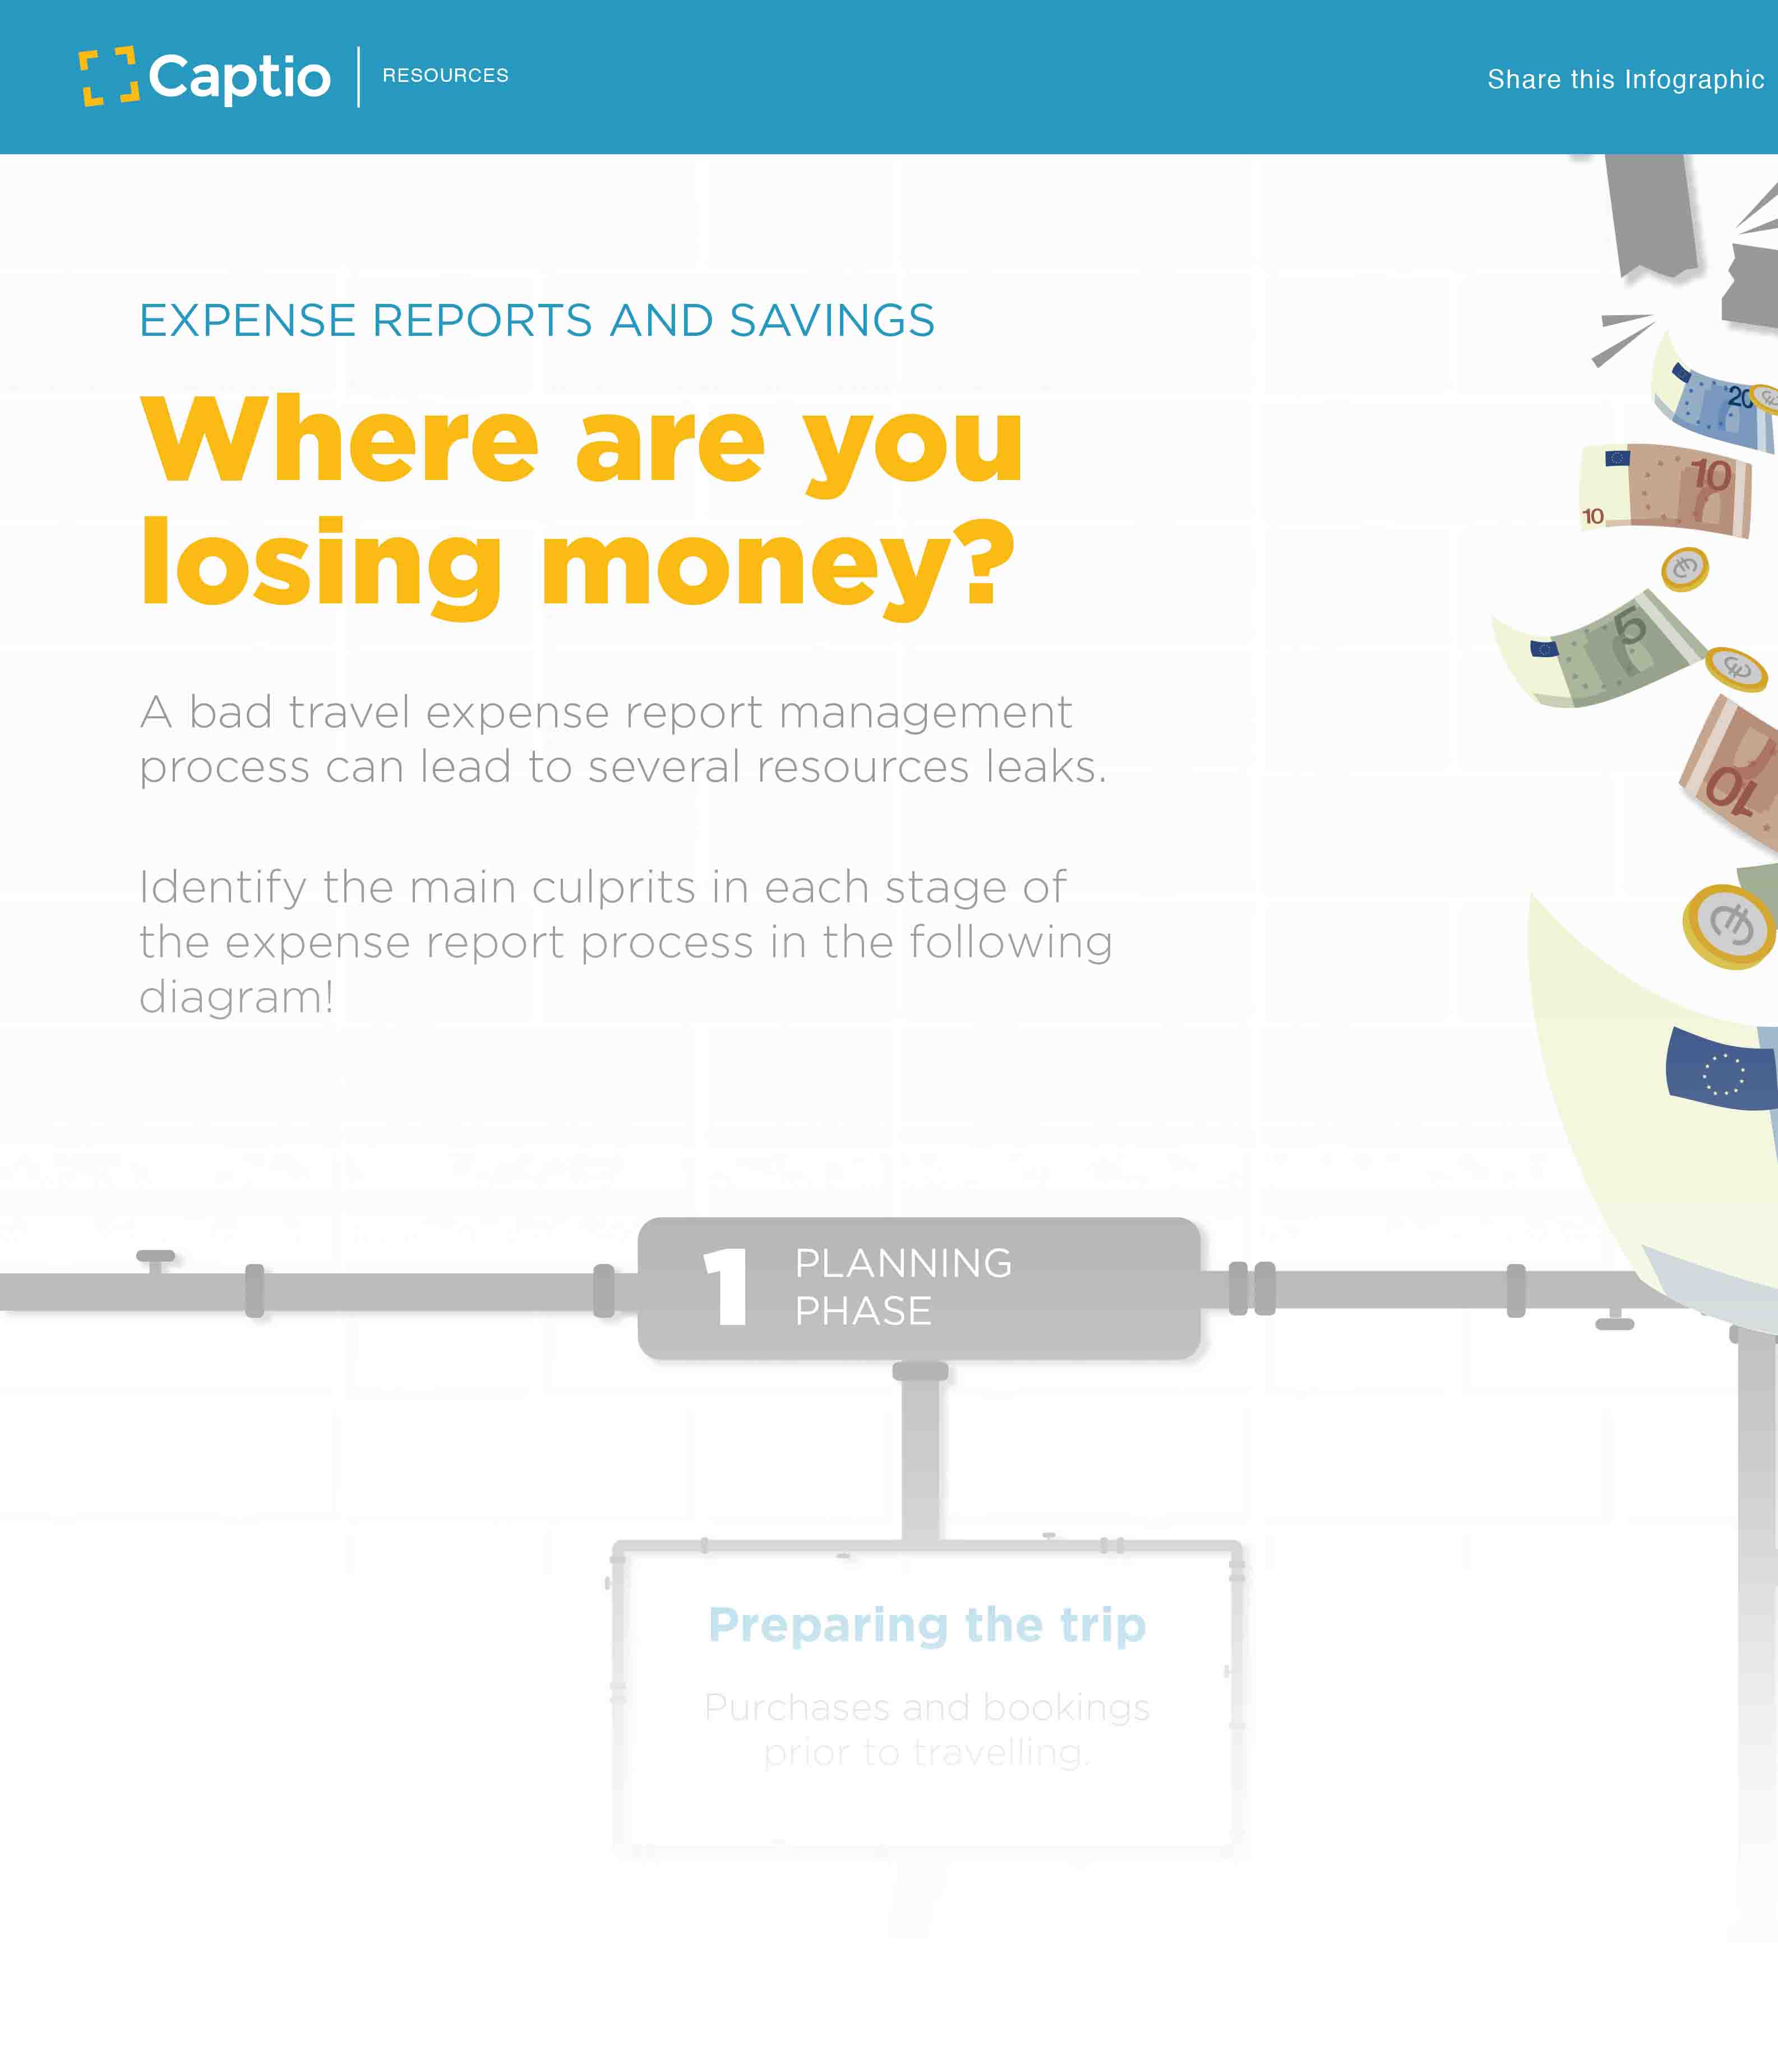 Expense reports and savings: where are you losing money?